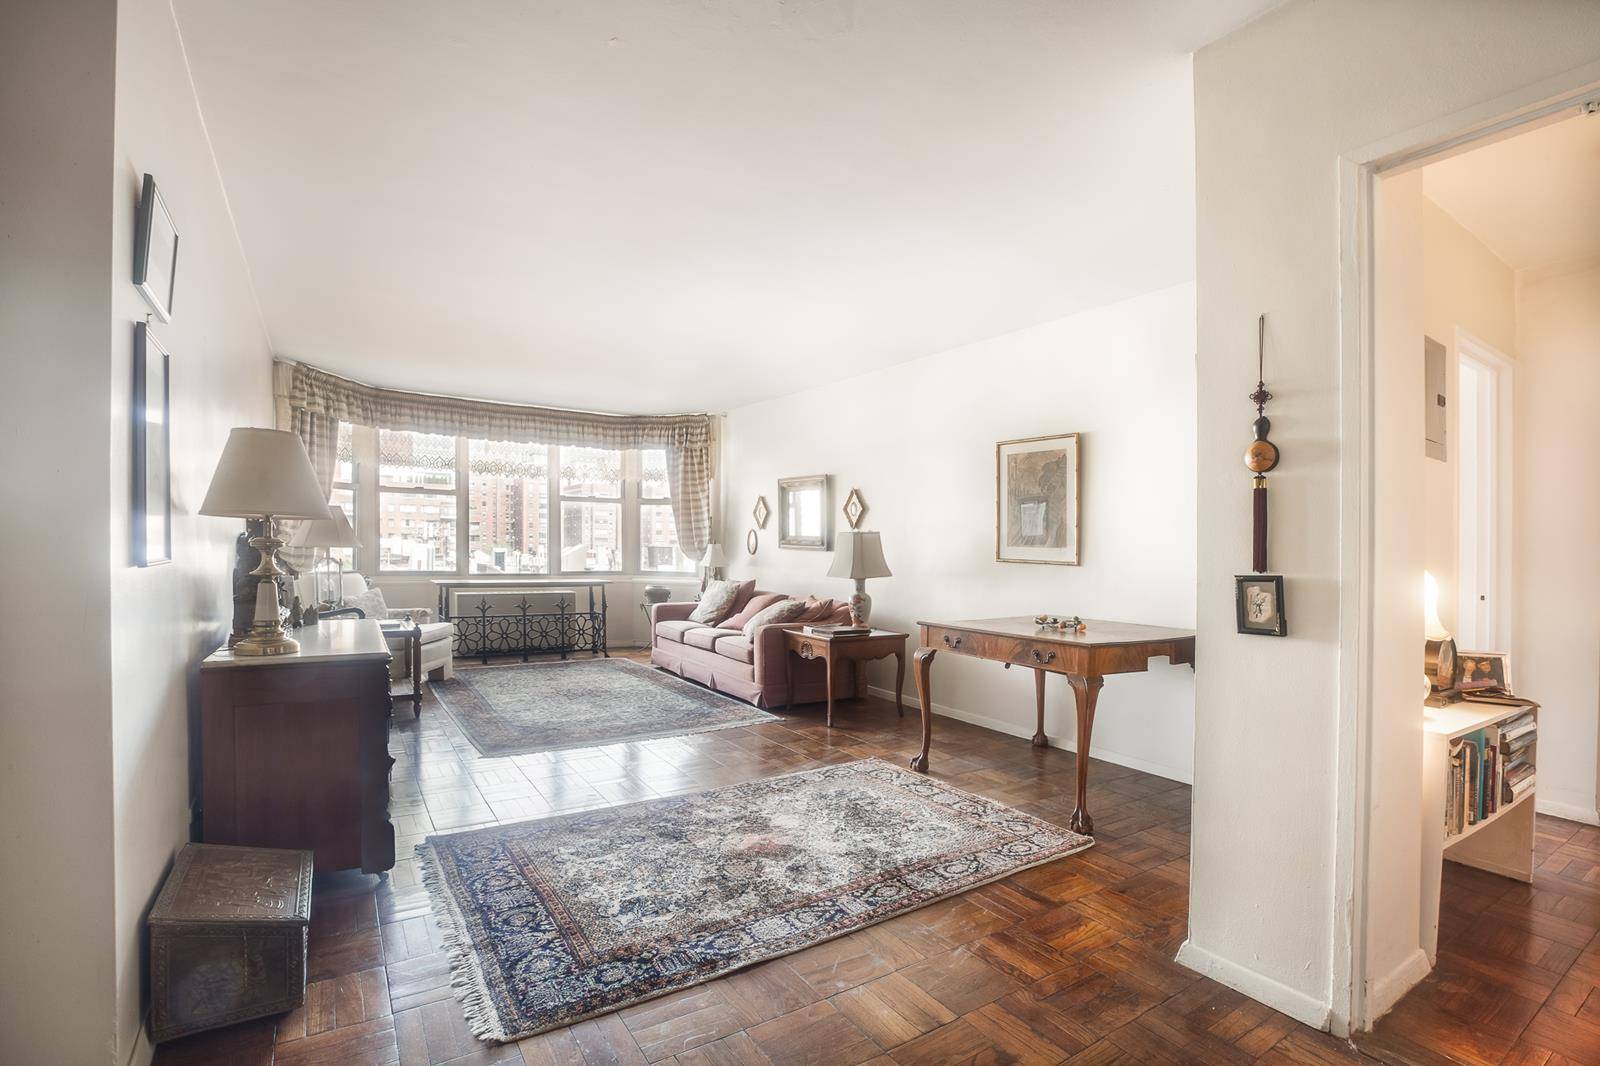 Welcome to the Morad Executives Perfectly situated in one of Manhattan's most serene and scenic neighborhoods, you now have the opportunity to enjoy this classic luxury co op building with ...